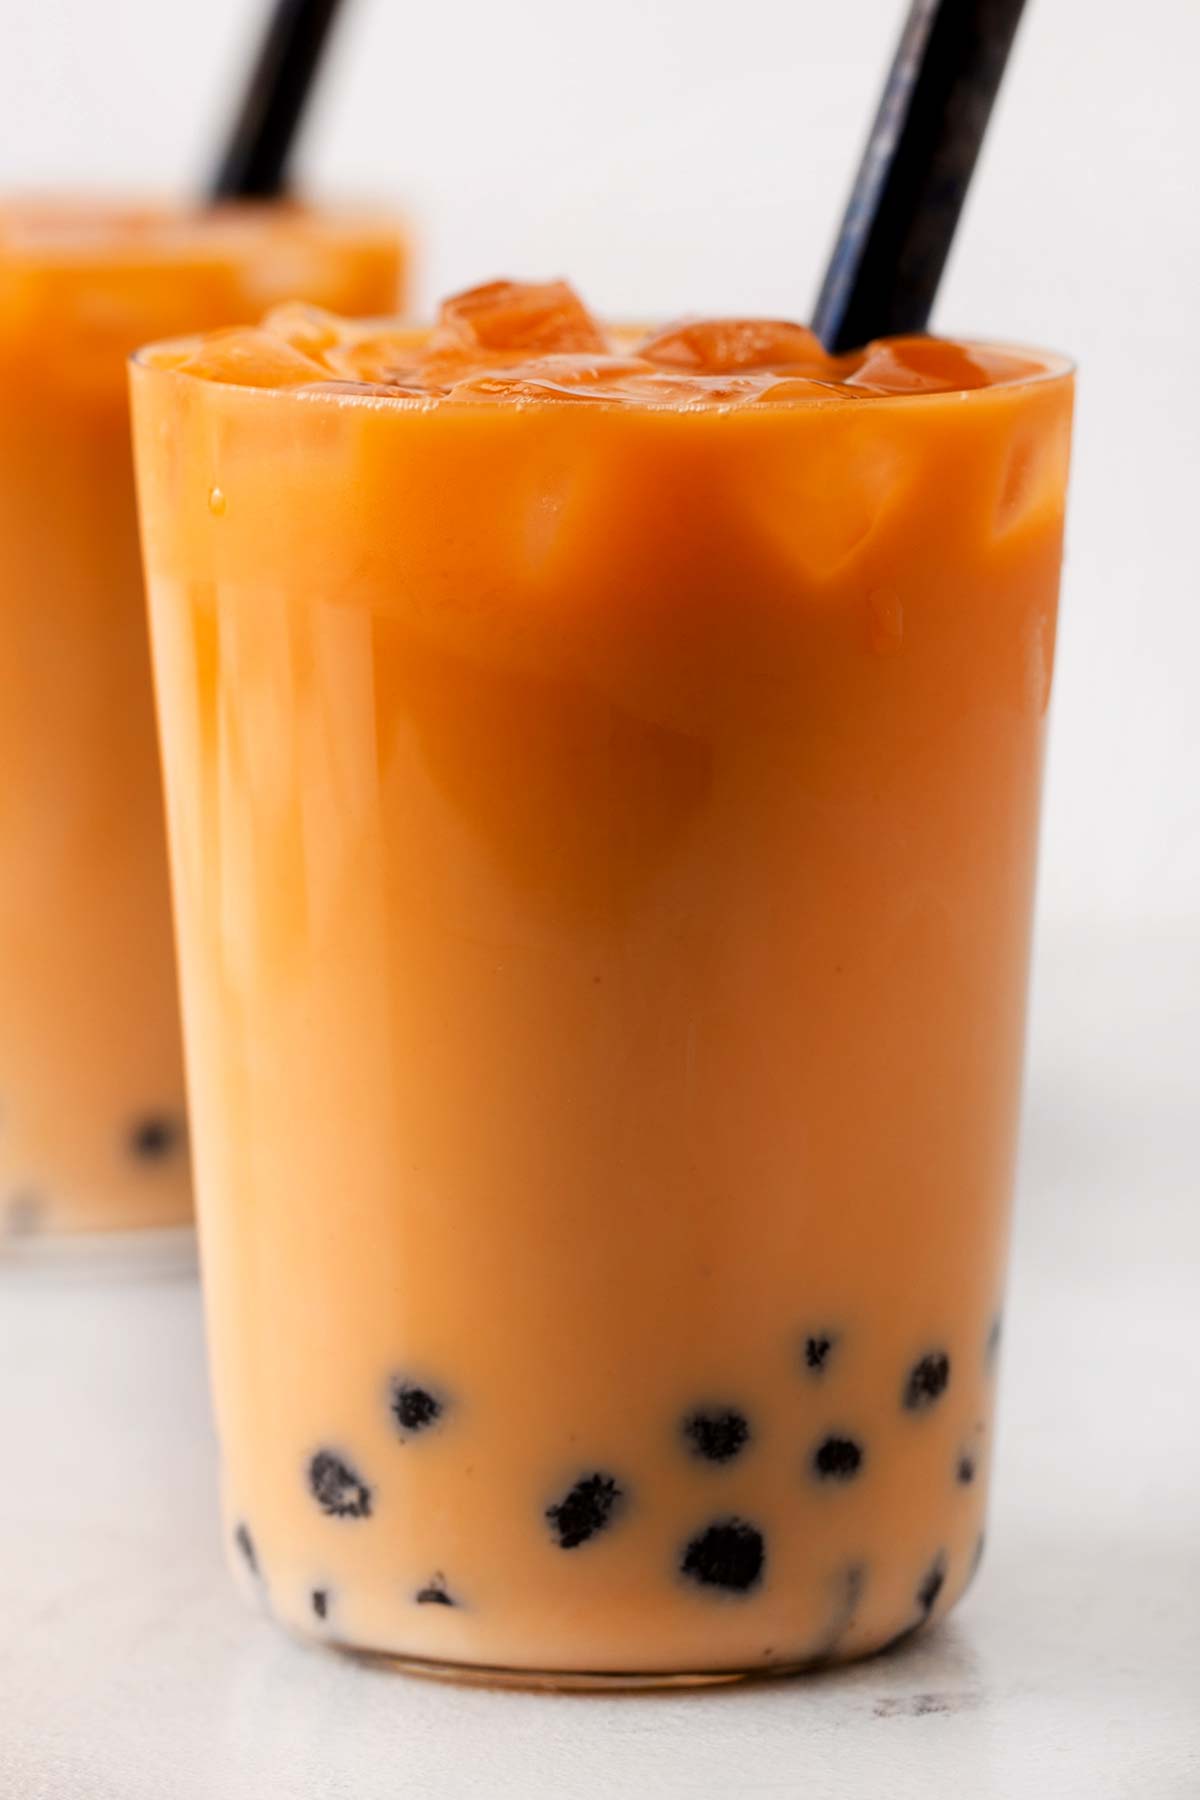 Thai Iced Tea with Boba in a cup with a black straw.